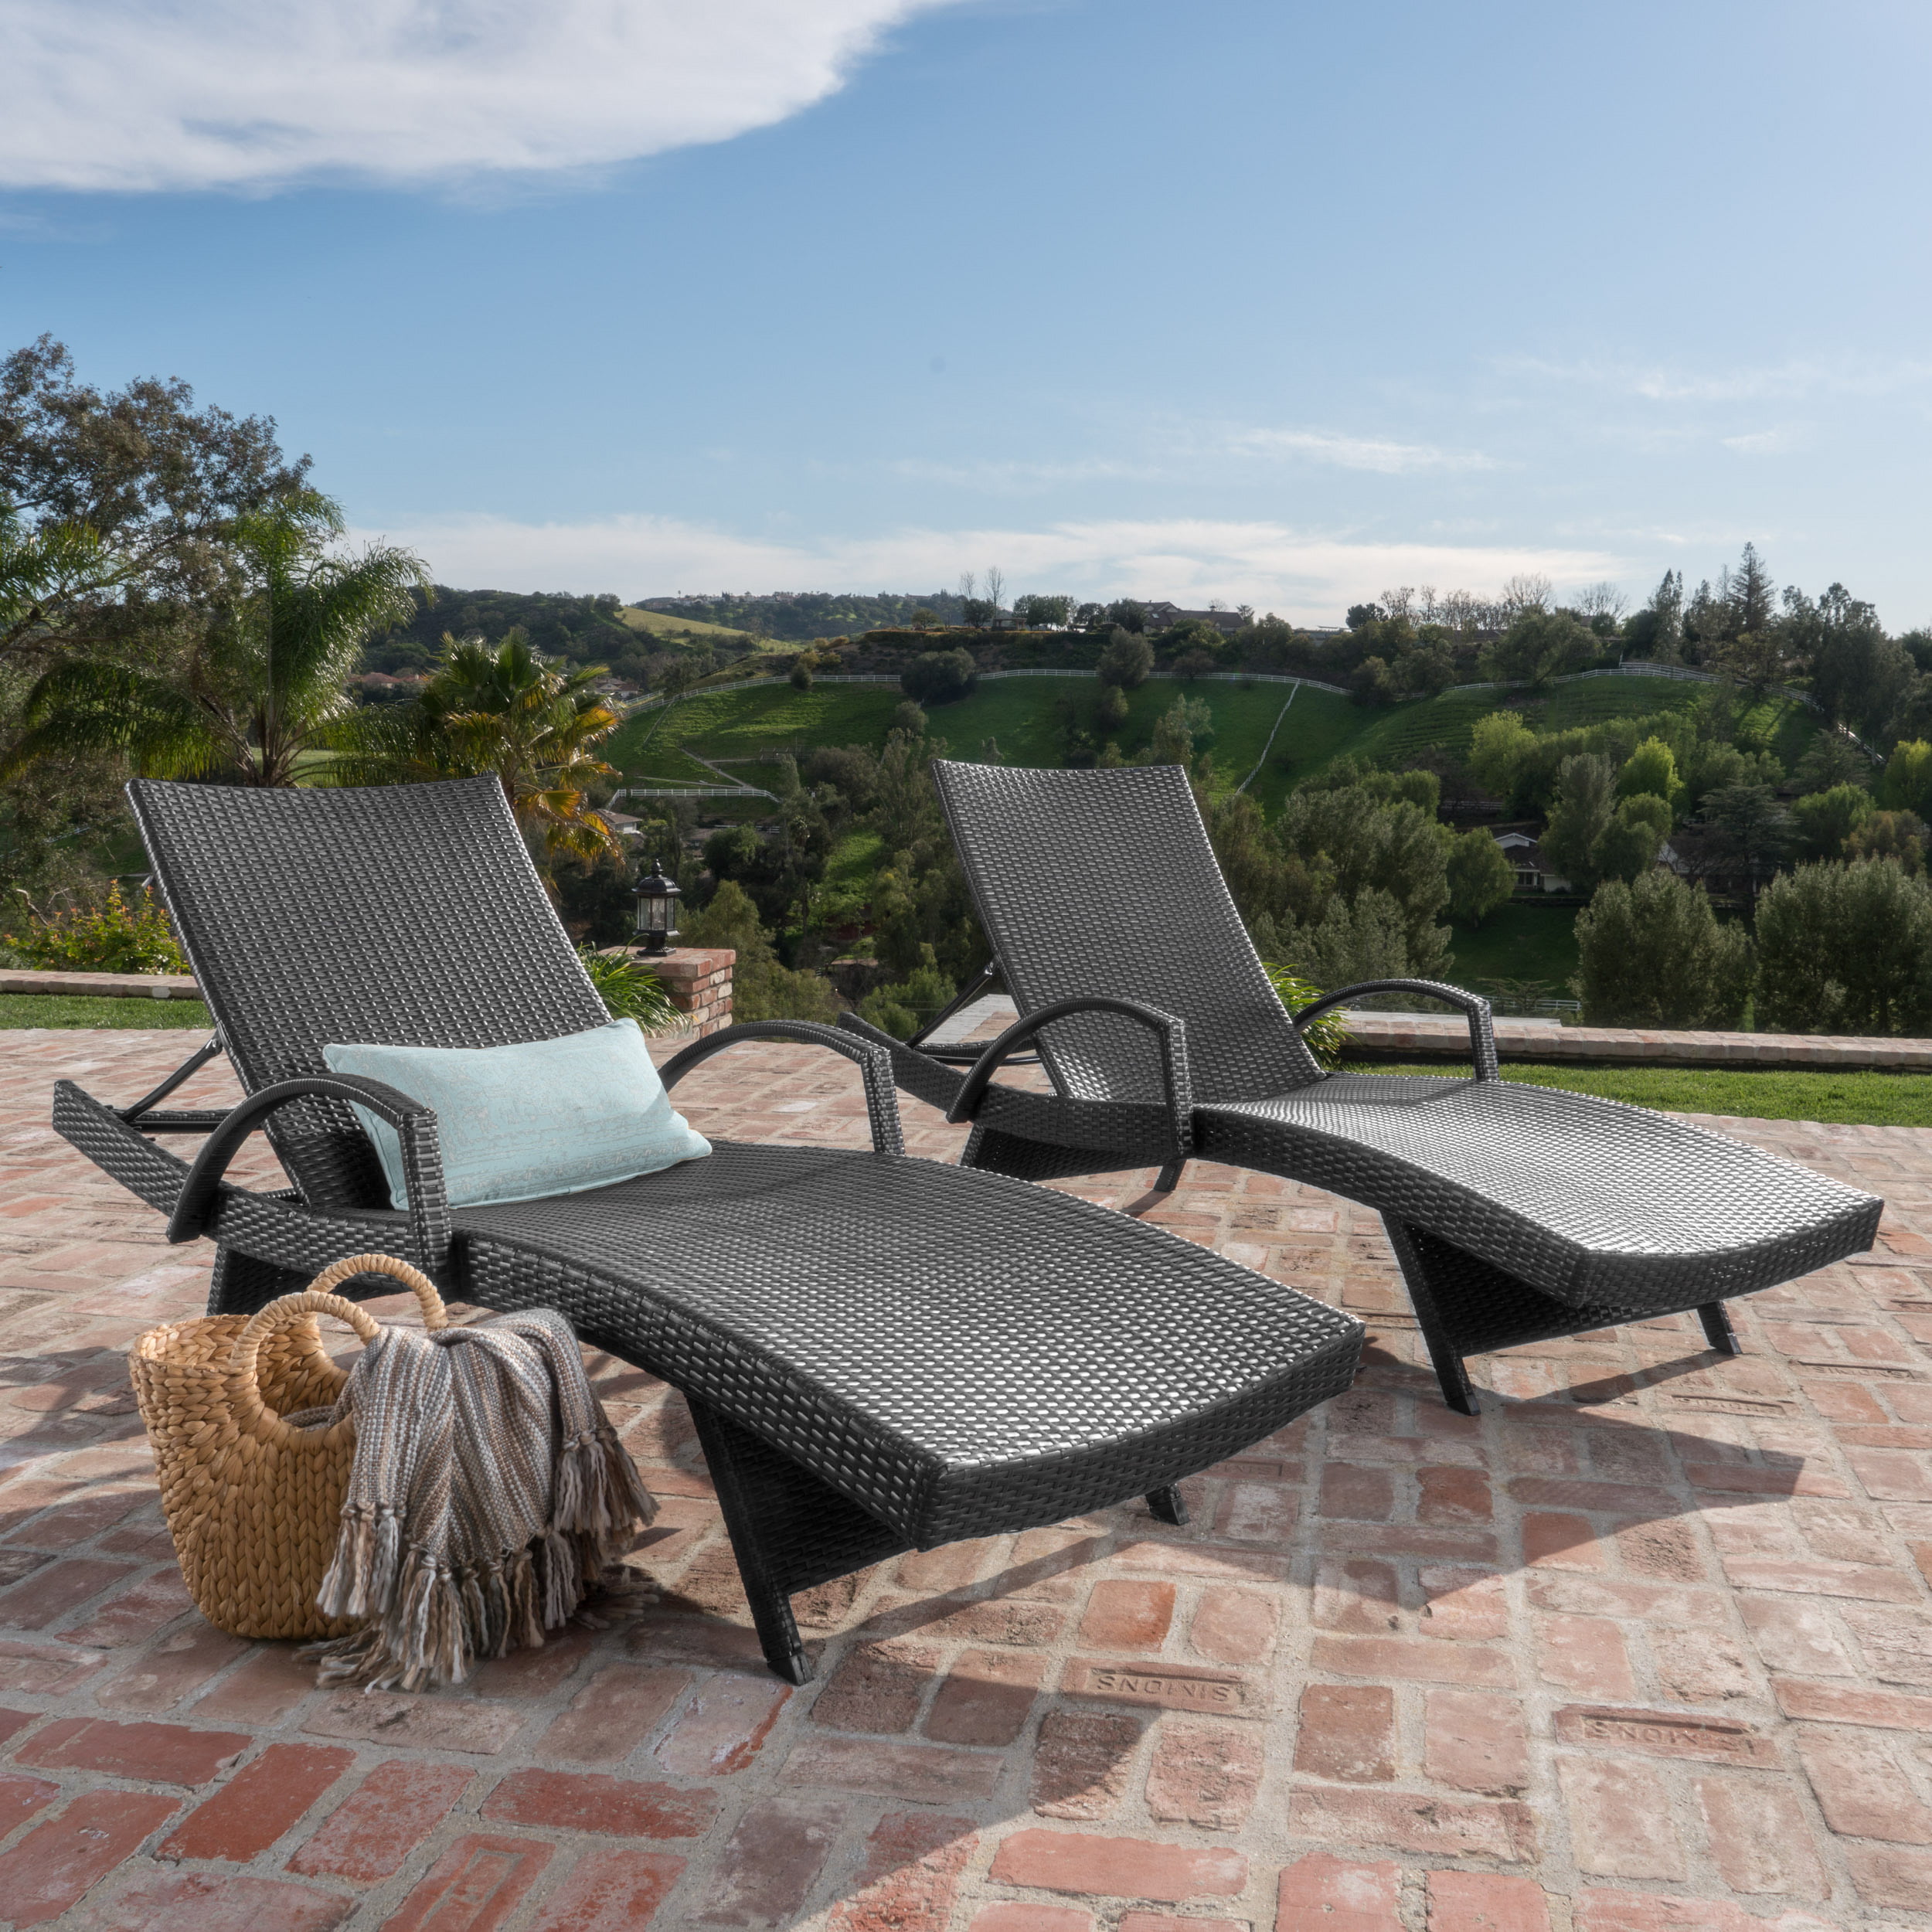 Anthony Outdoor Wicker Arm Chaise Lounges (Set of 2), Grey - Walmart